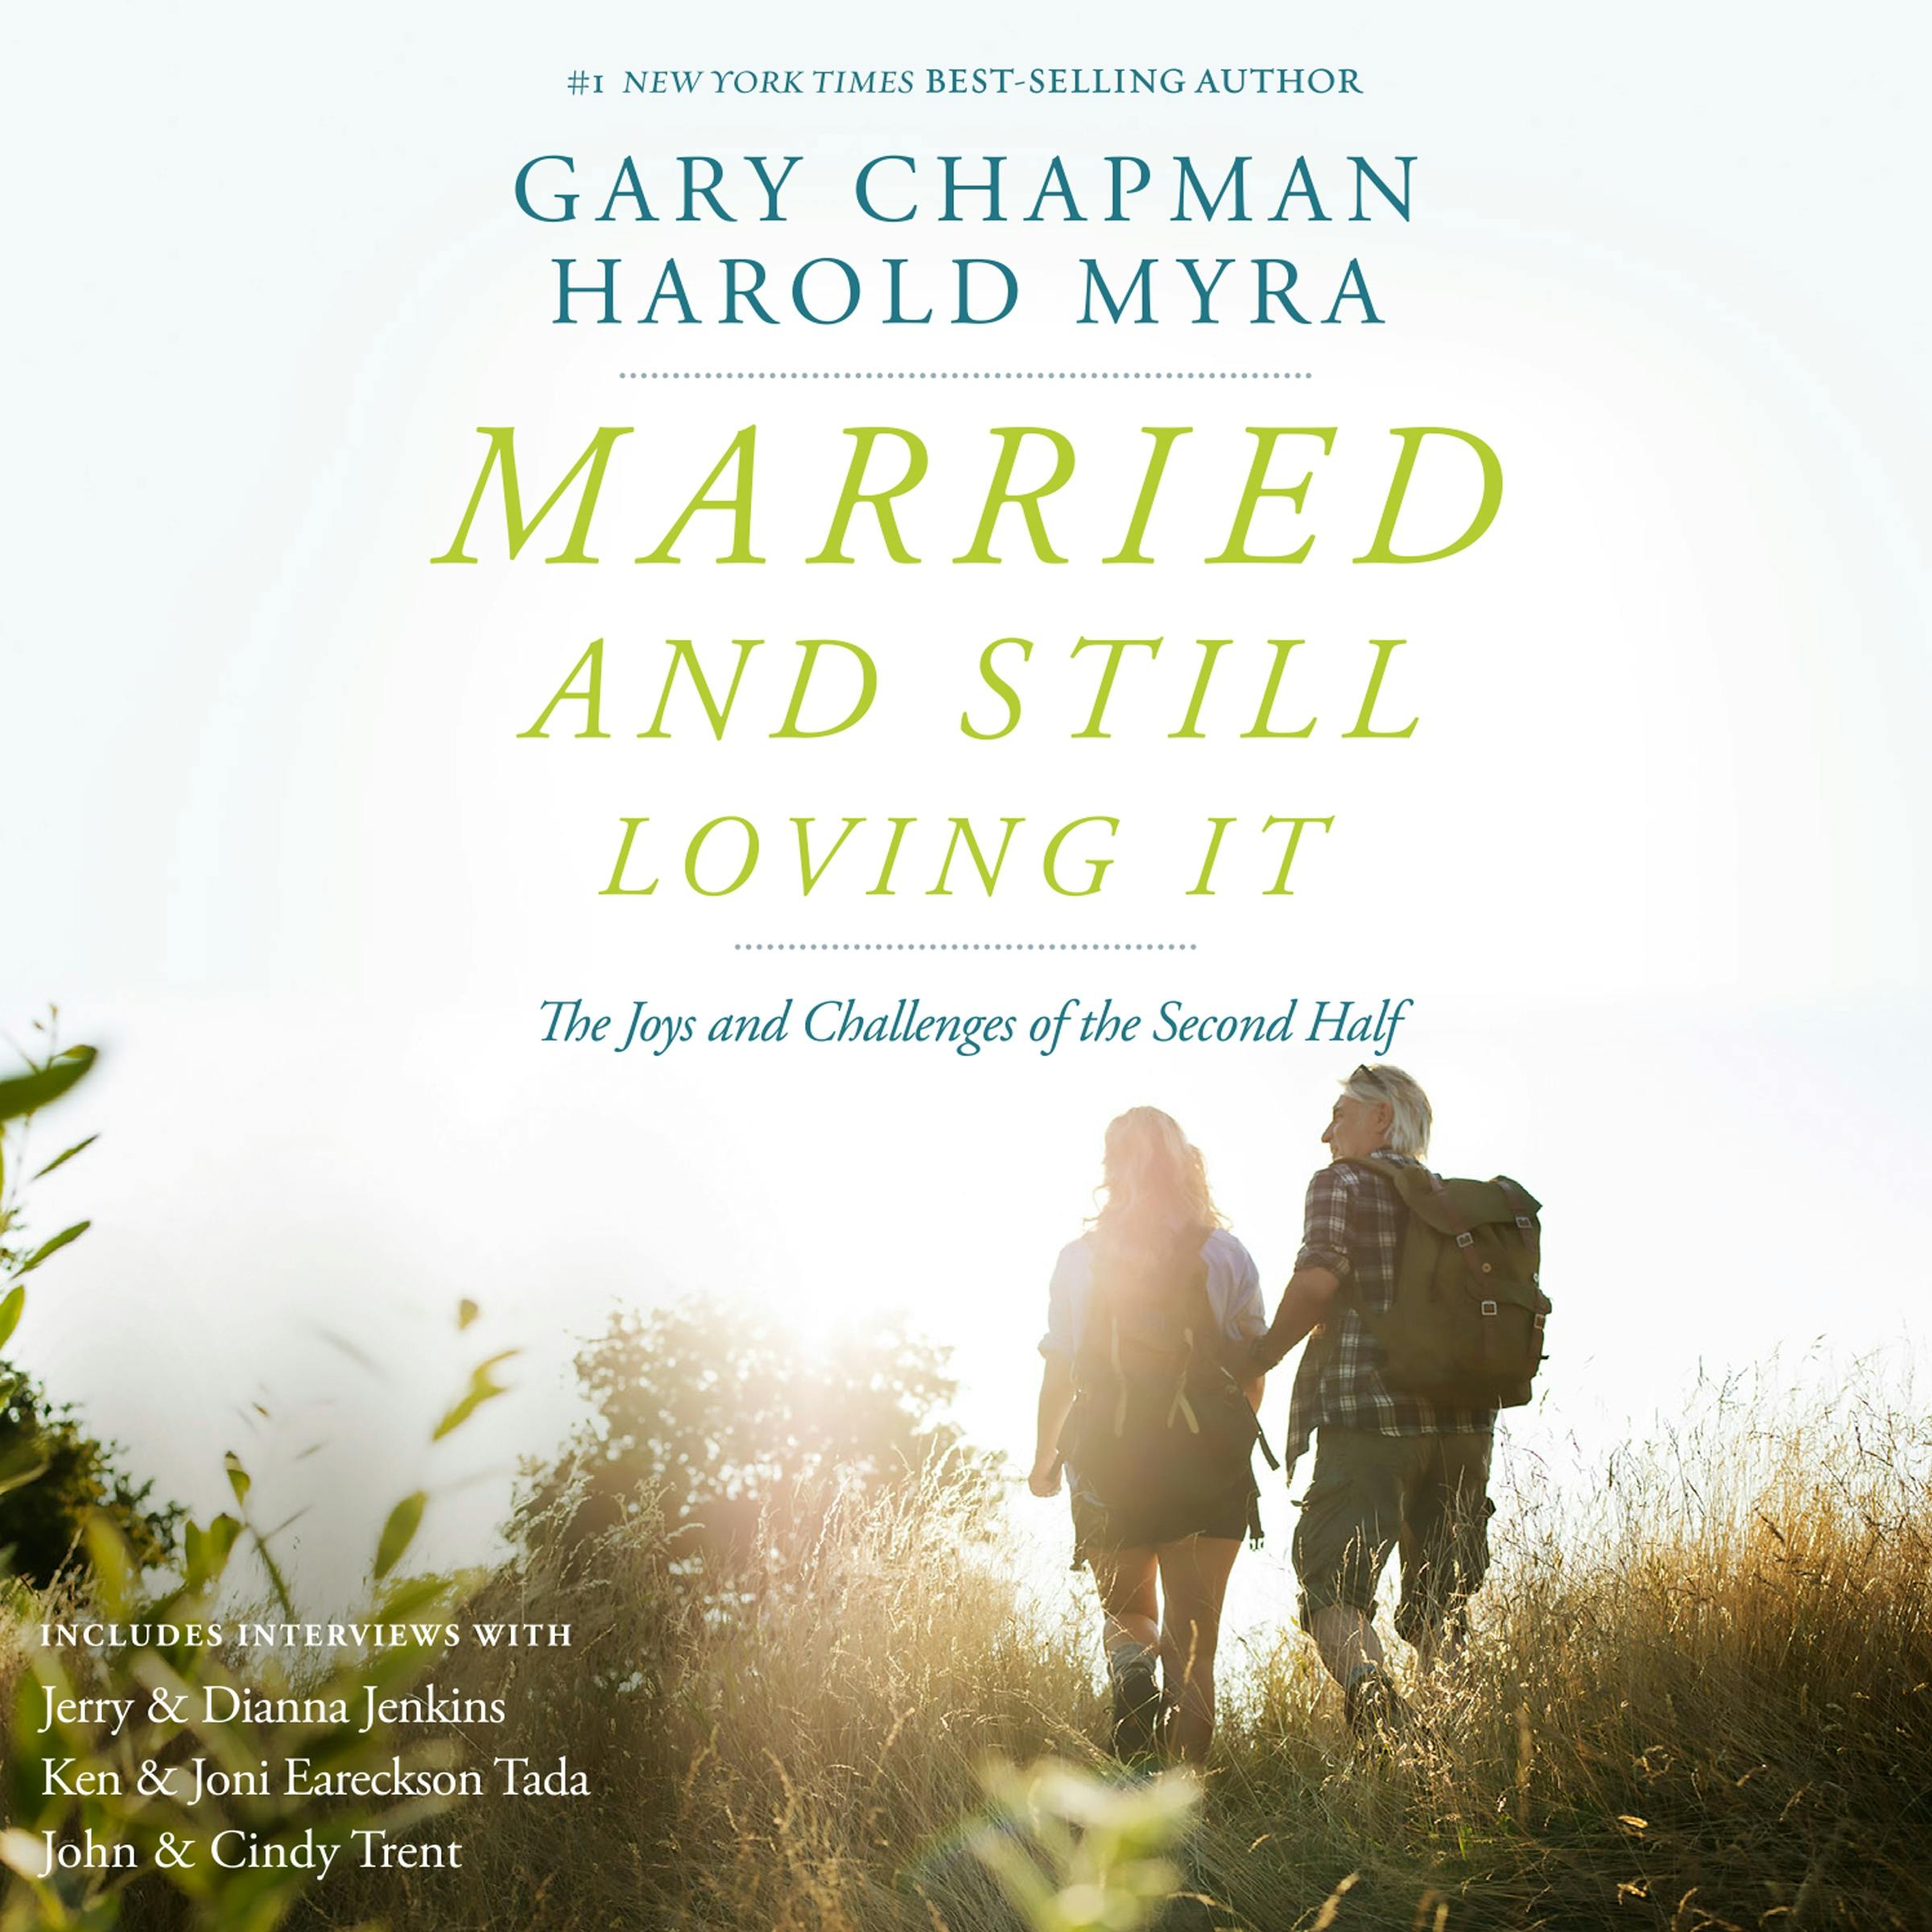 Married and Still Loving It: The Joys and Challenges of the Second Half - Harold Myra, Gary Chapman